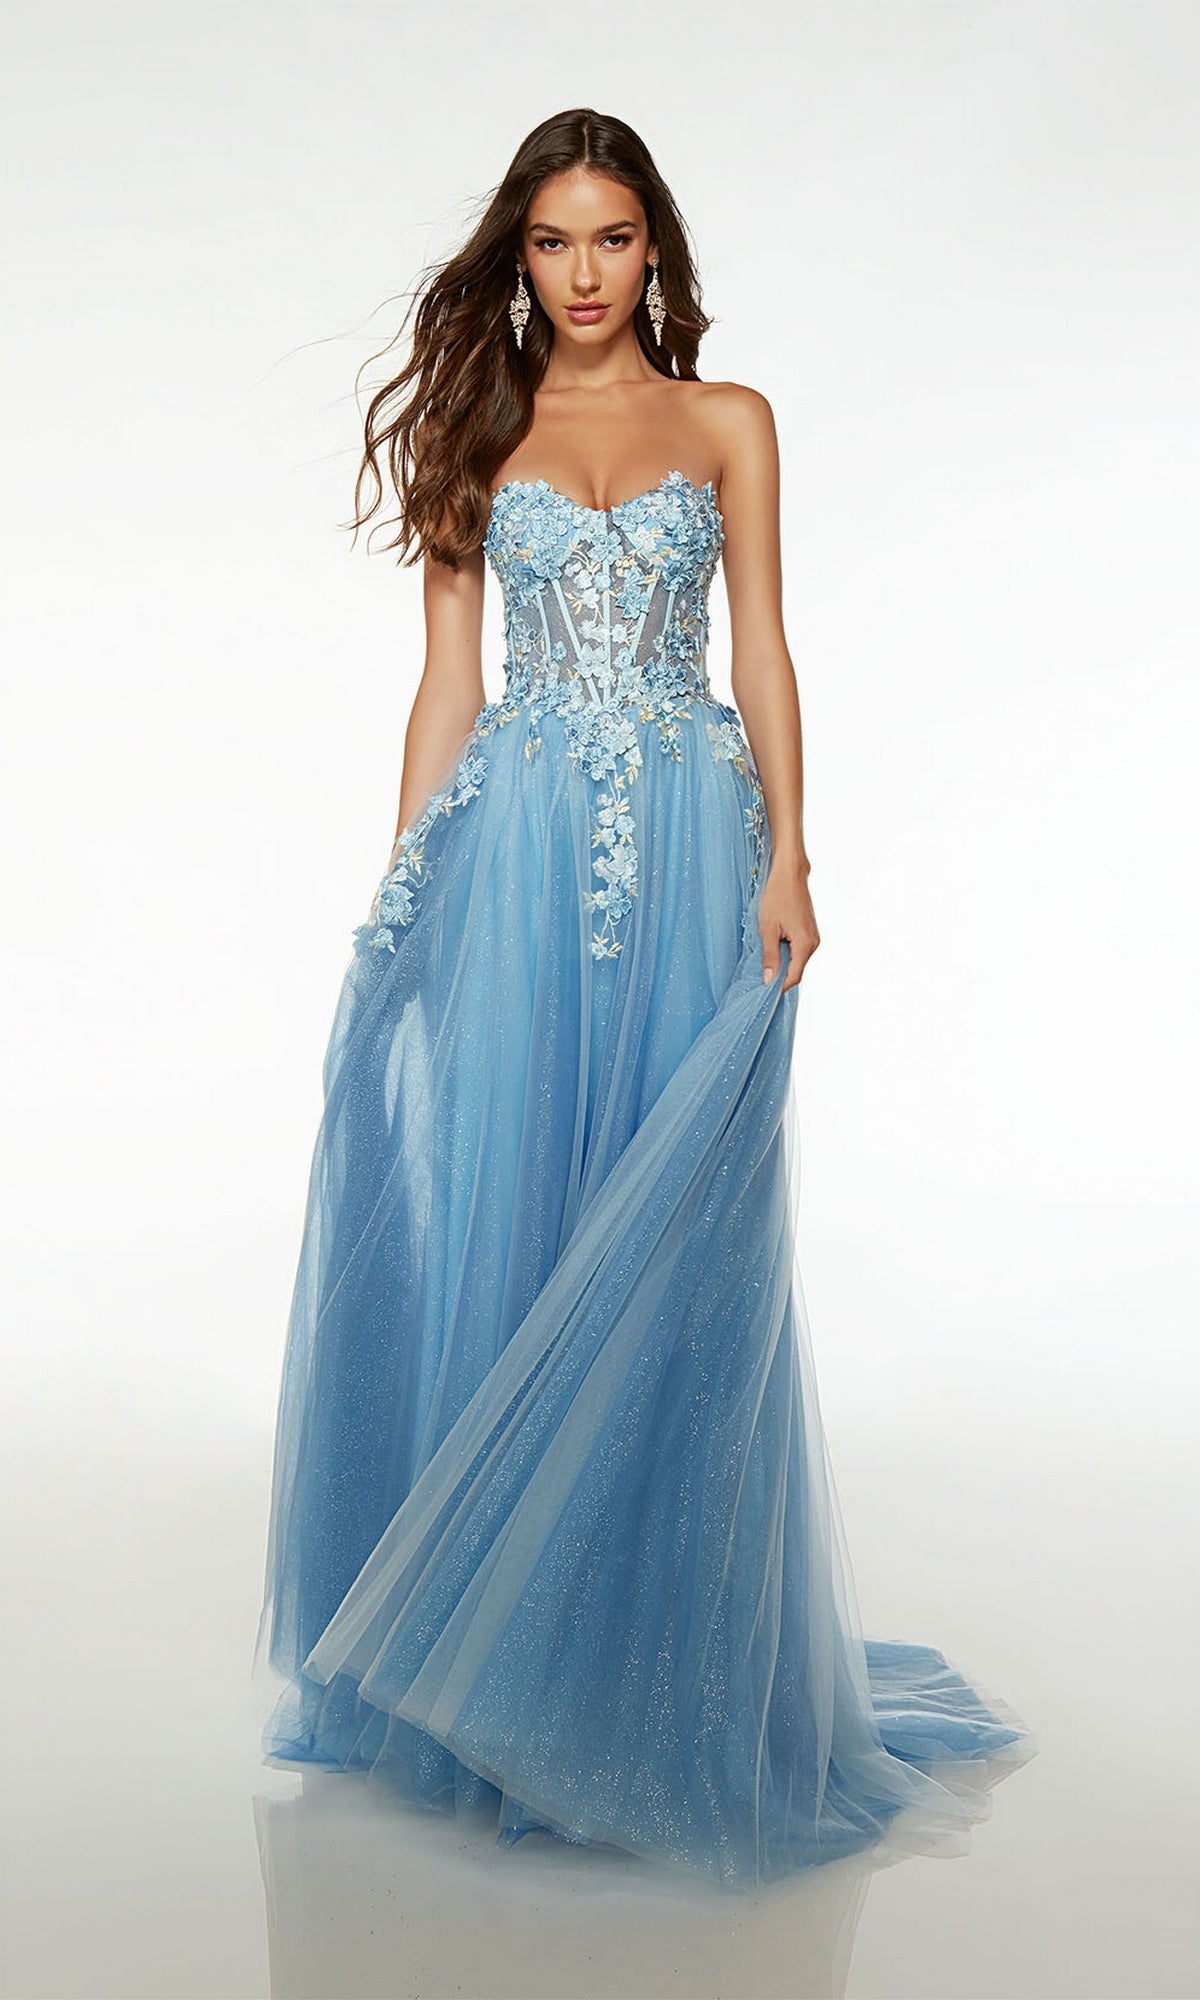 Alyce Strapless Embroidered Pastel Prom Dress 61634